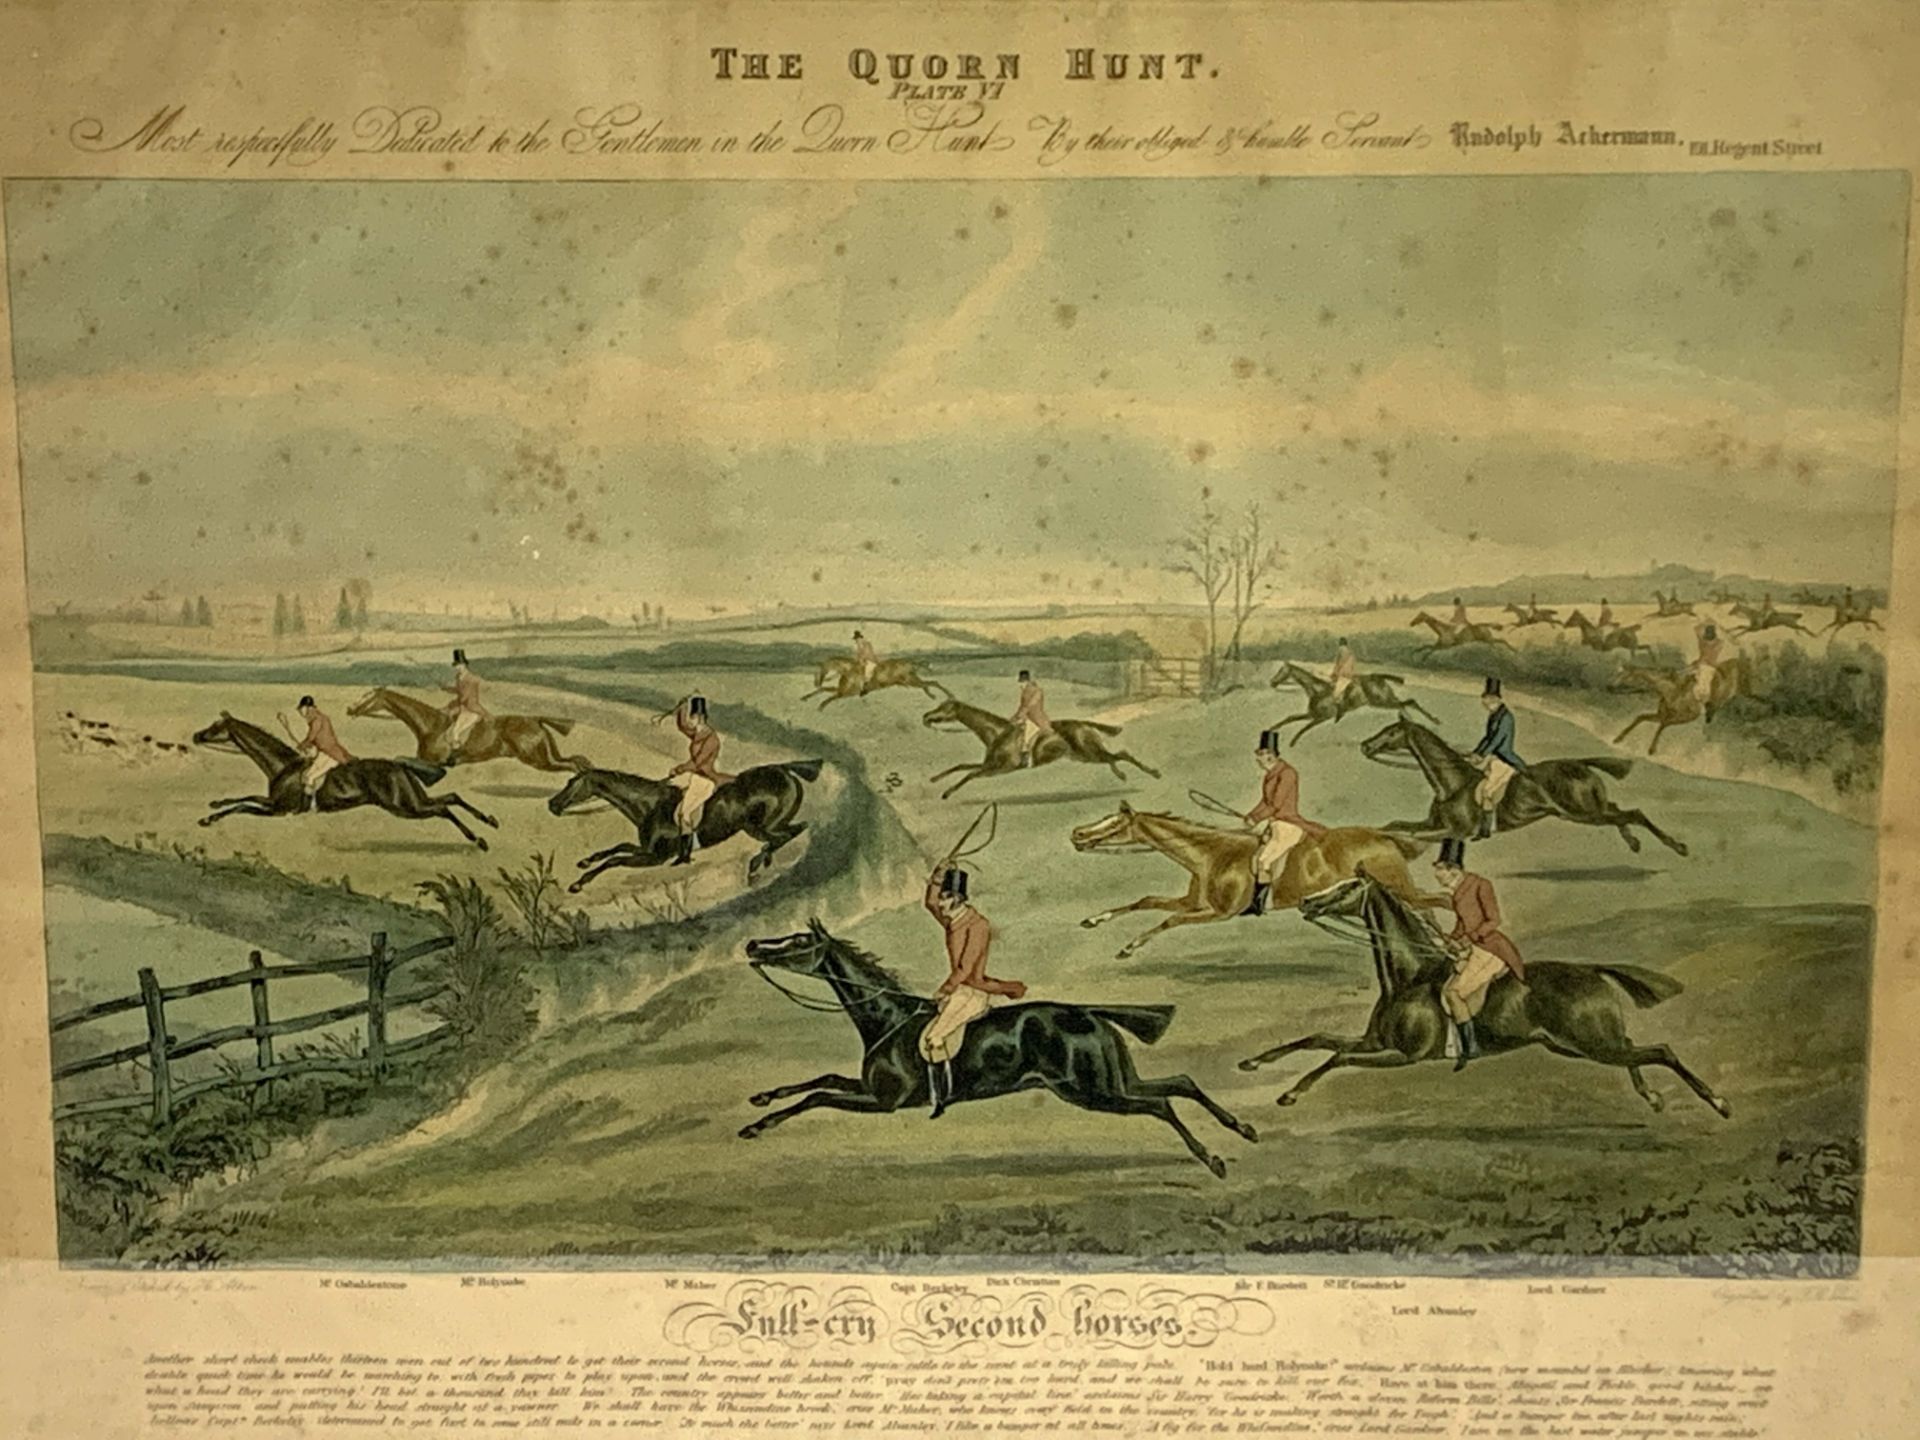 Set of eight framed and glazed 19th Century prints of the Quorn Hunt by Ackerman, drawn by Alken - Image 7 of 8